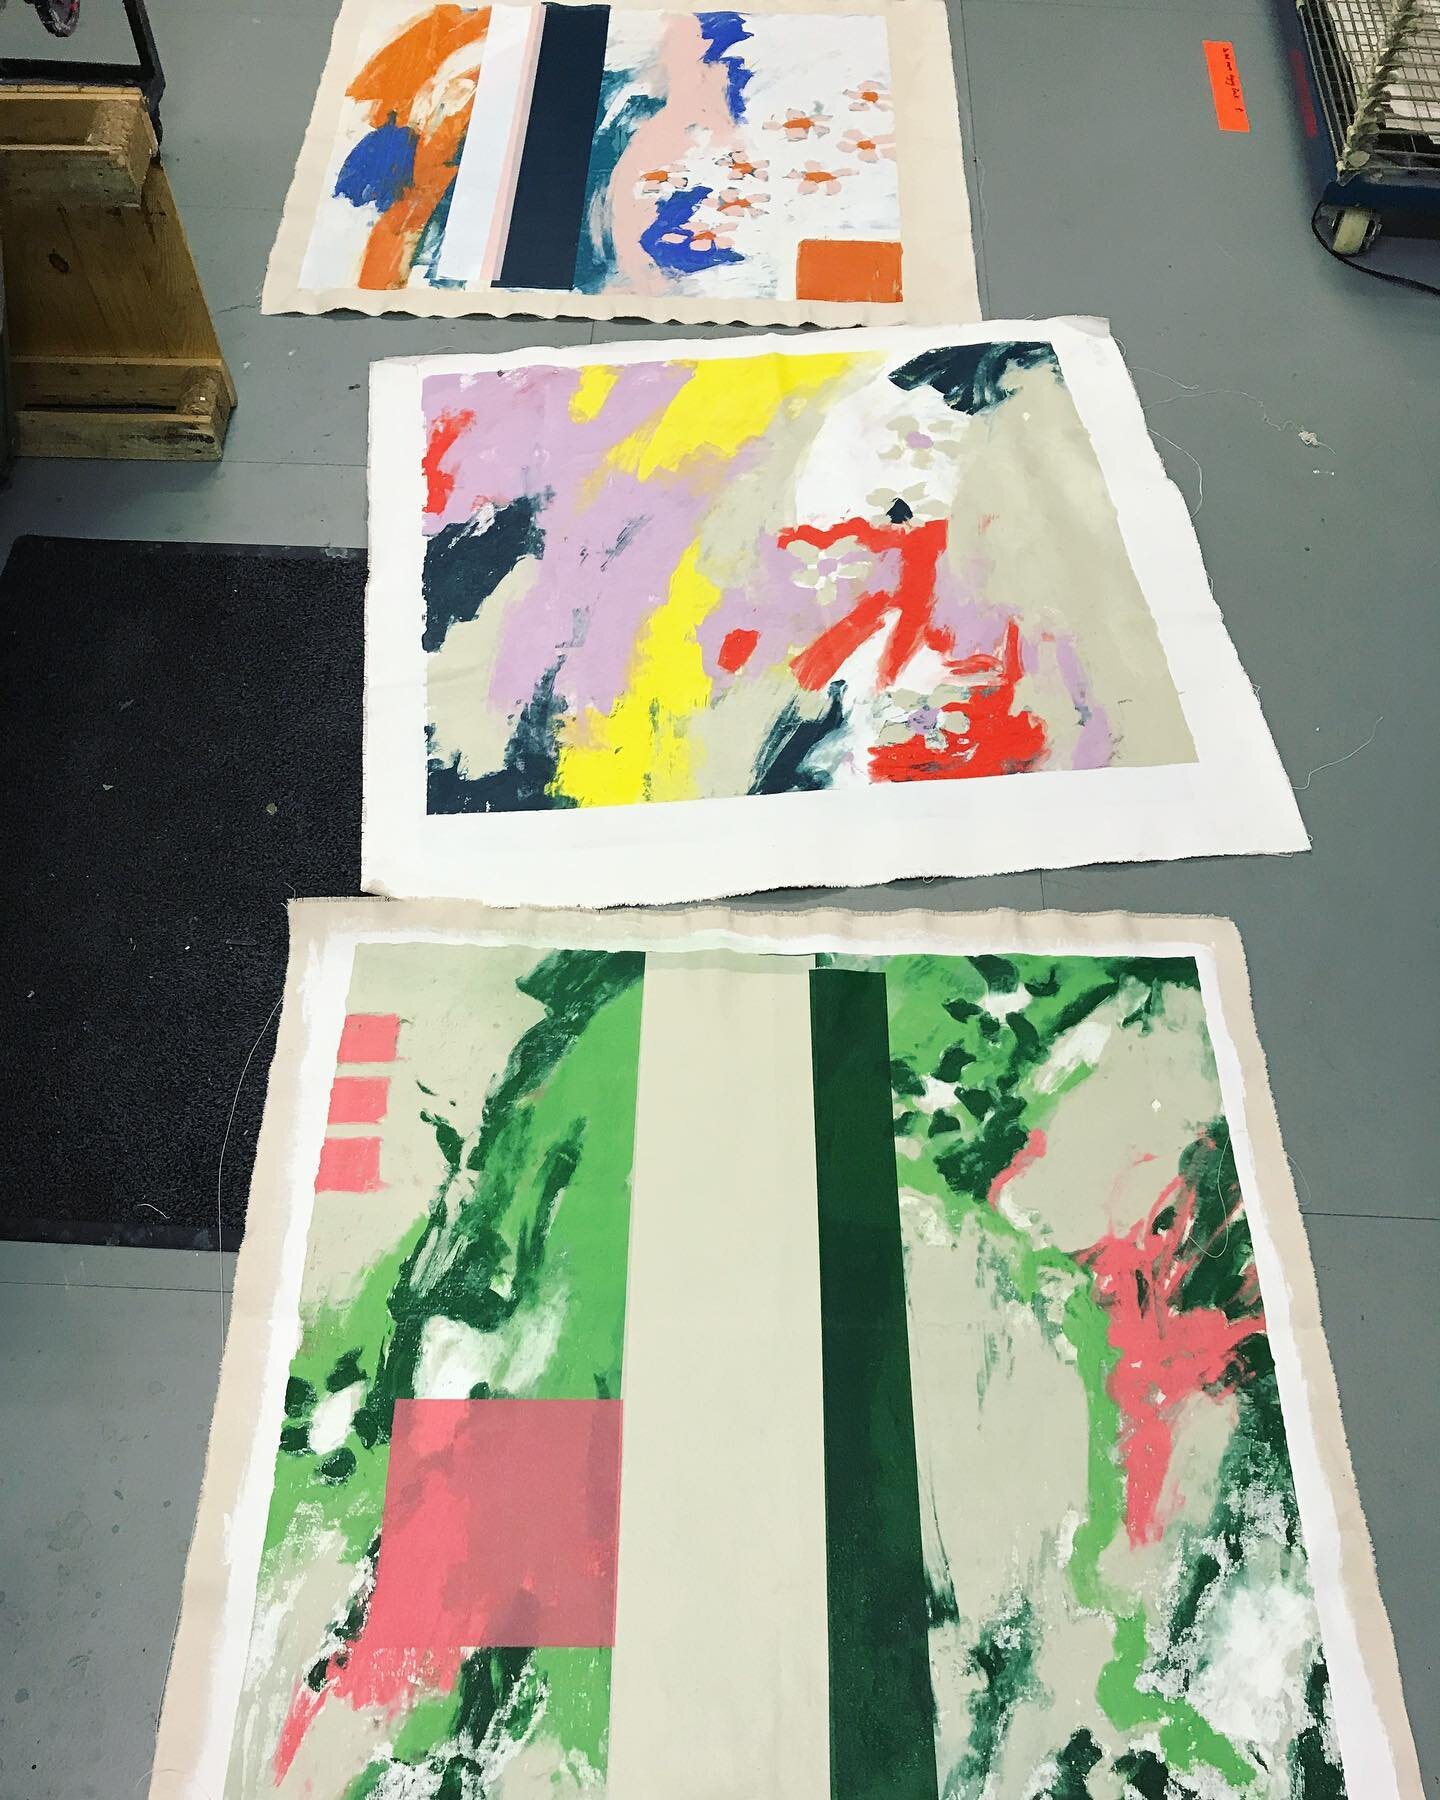 Prints on canvas that are still to be stretched. Wasn&rsquo;t sure these would actually work but after a few weird prints I got there in the end! 
.
.
.
.
.
.
.
.
.
.
.
.
.
#screenprint #print&nbsp;#printmaking&nbsp;#screenprinting #monoprinting #art